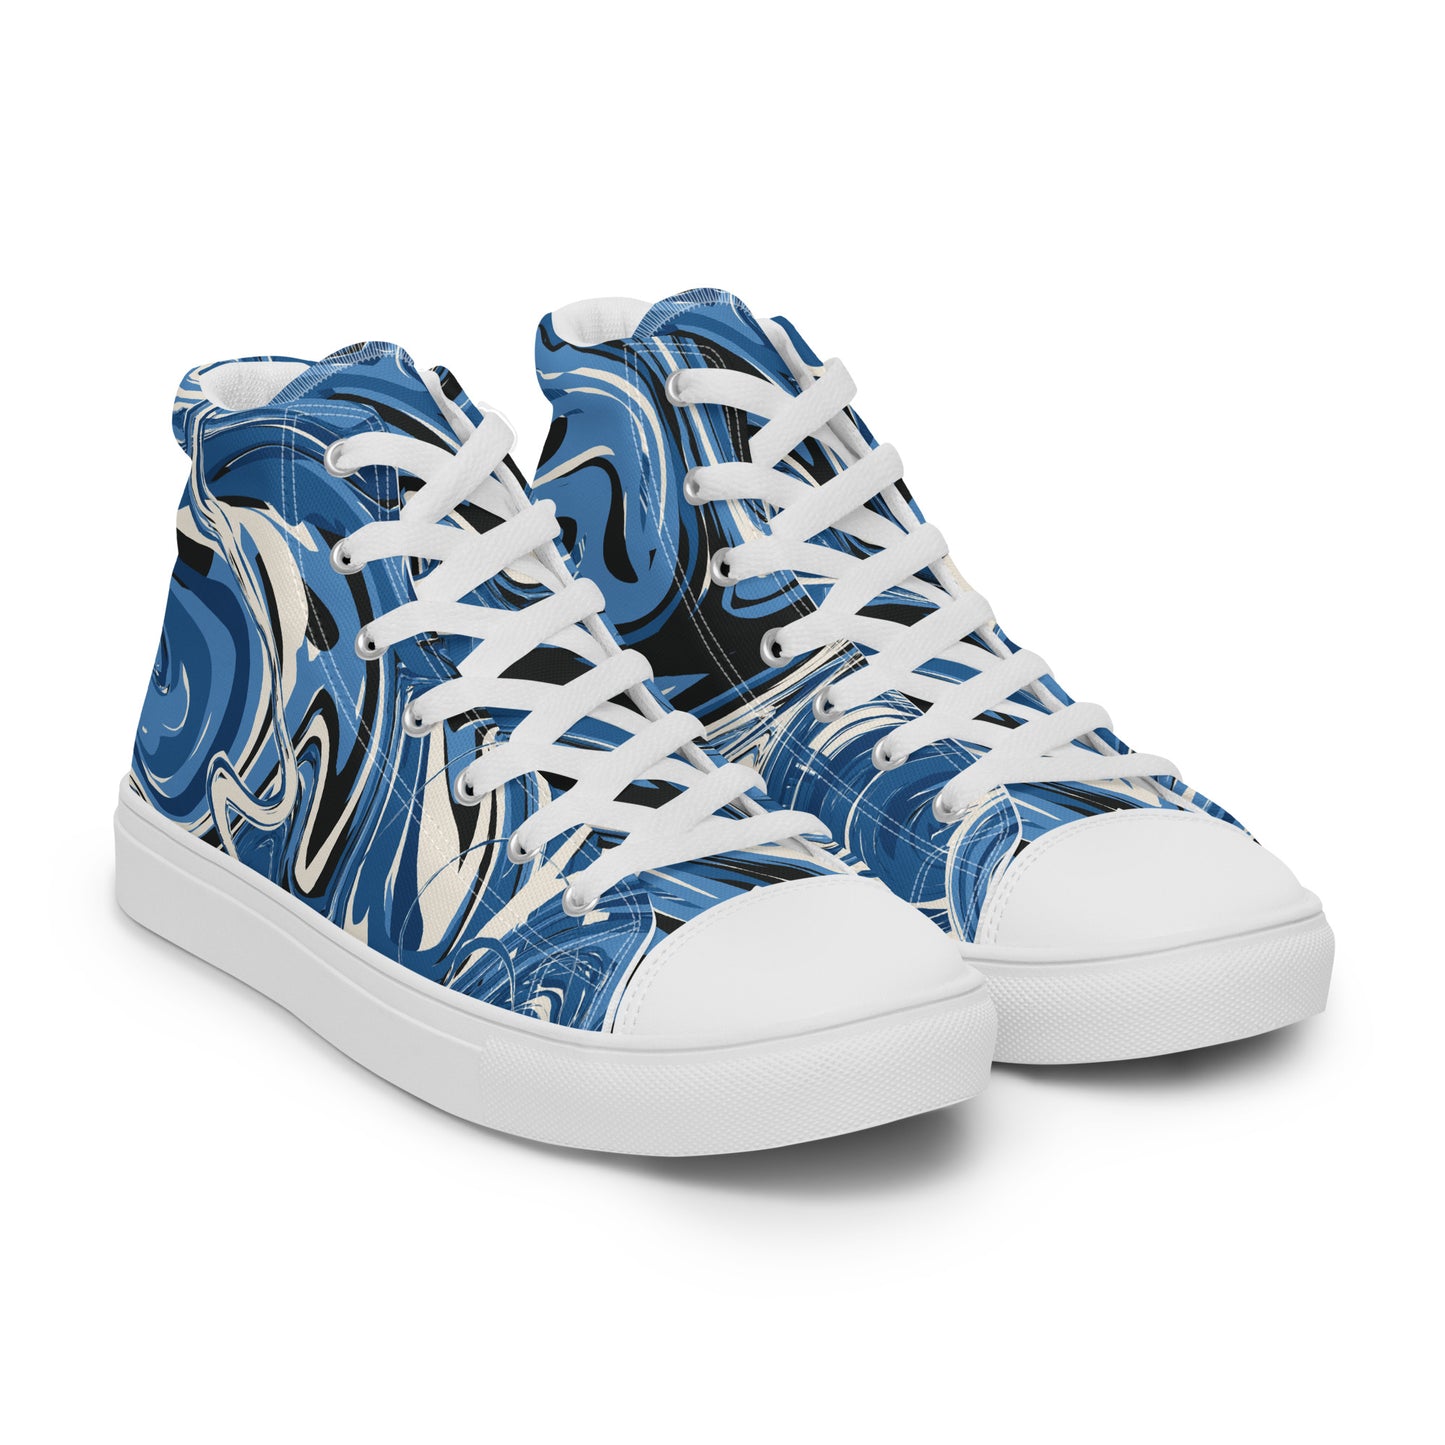 Hendrix high top canvas shoes